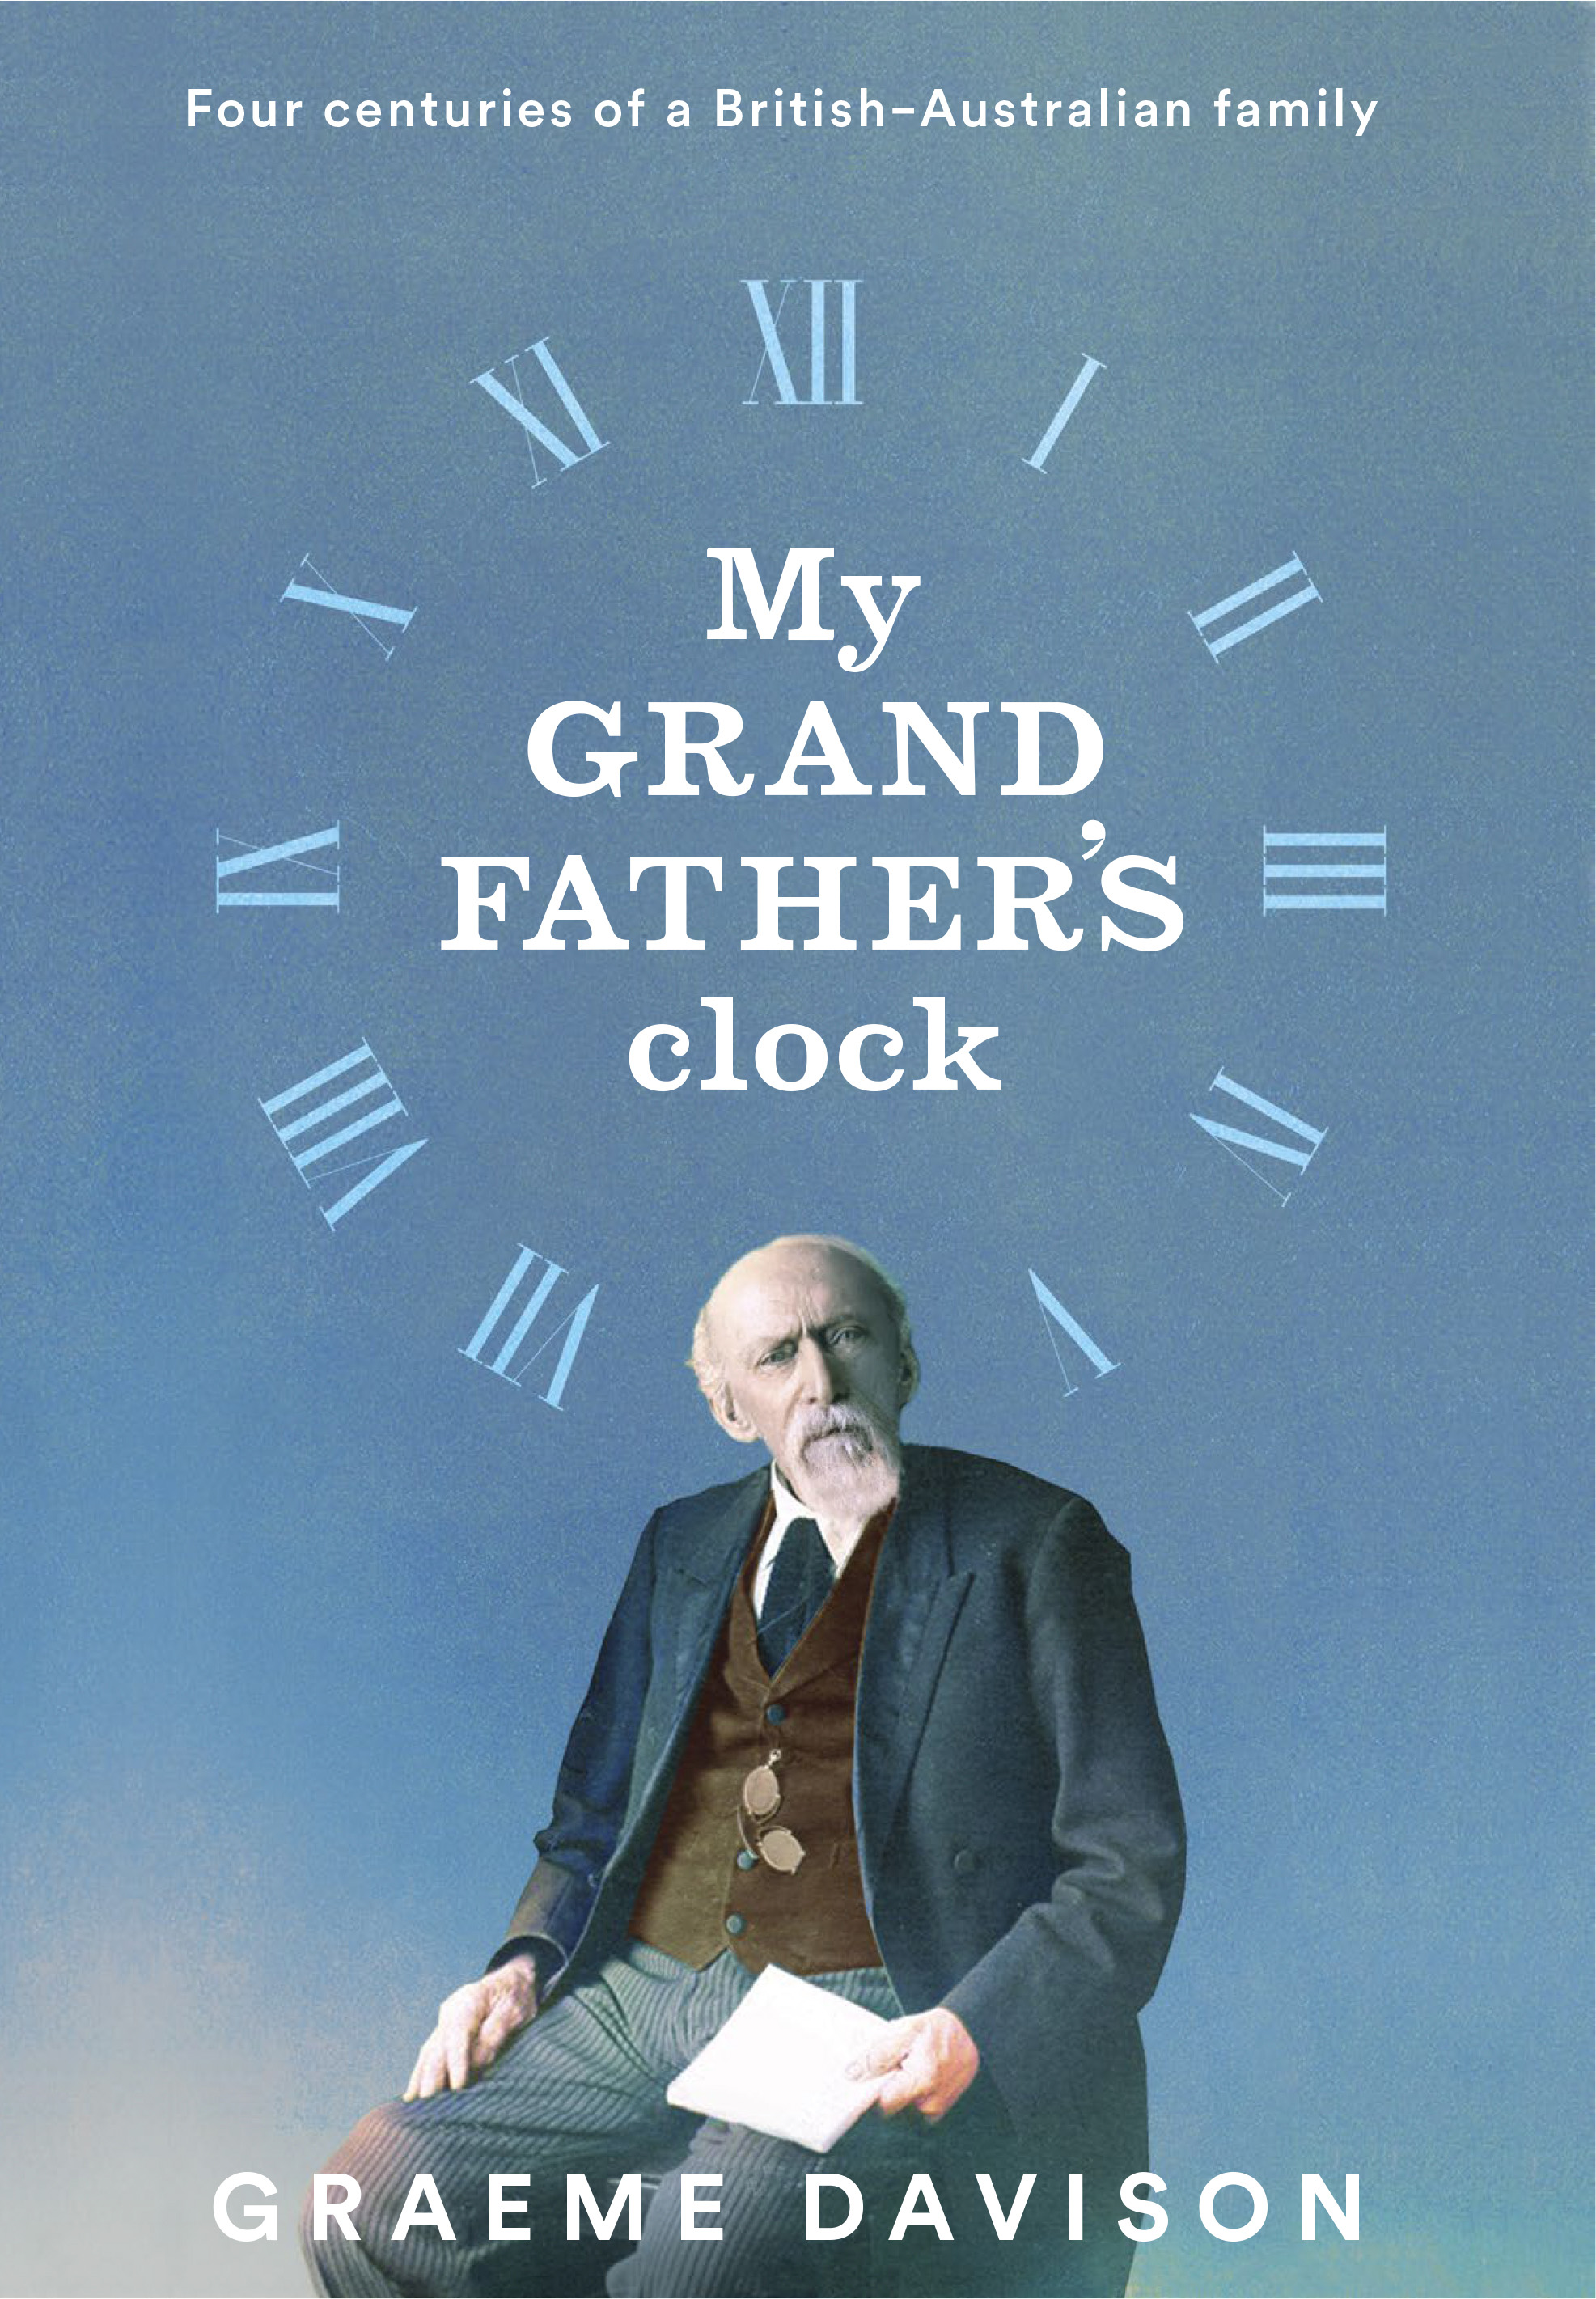 My Grandfather's Clock: Four centuries of a British-Australian family